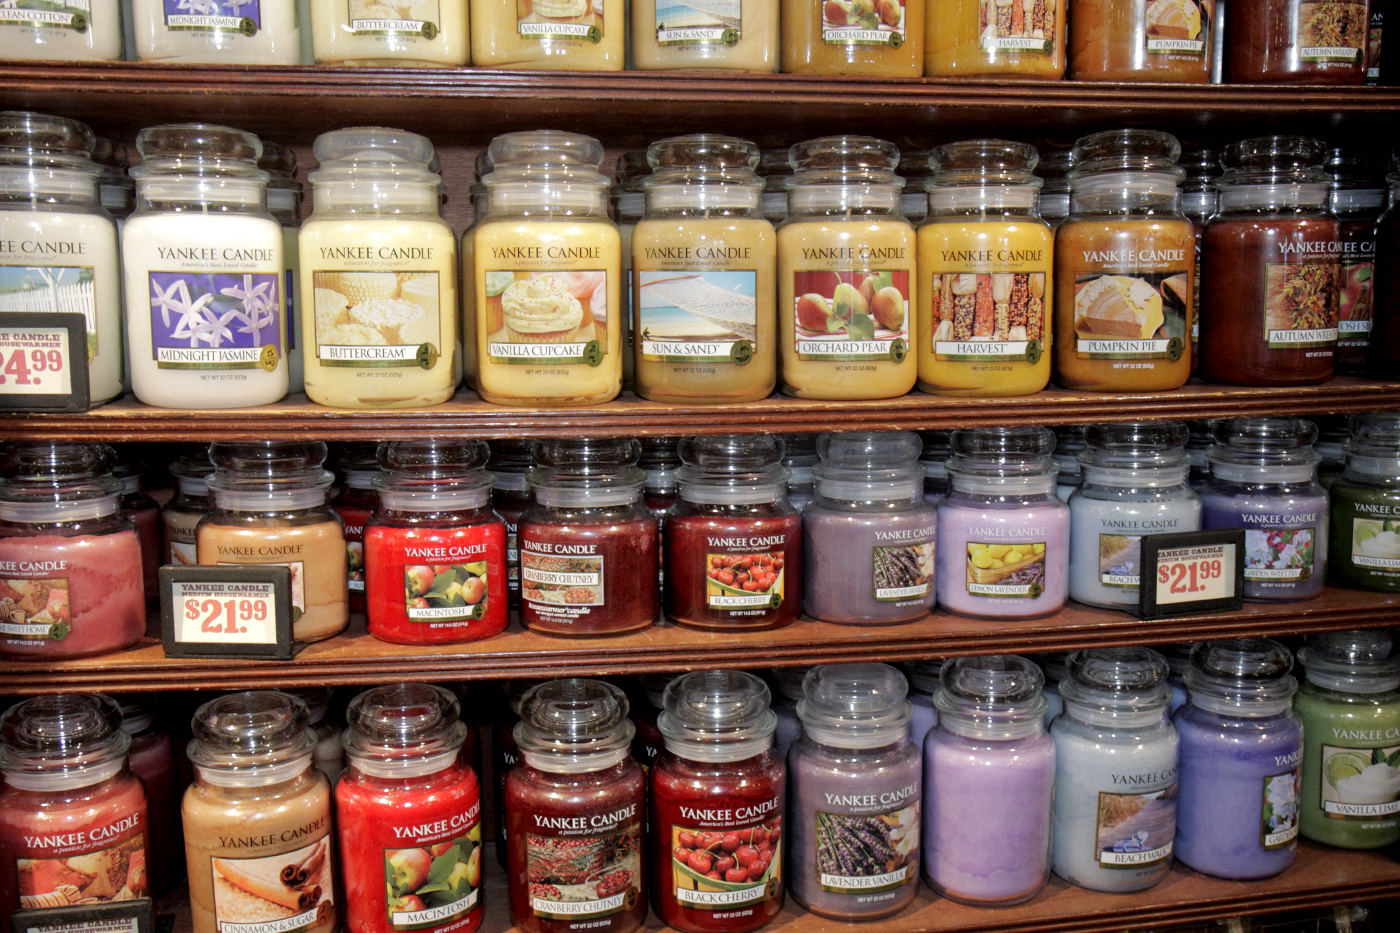 What Yankee Candle Reviews Reveal About COVID-19 Trends